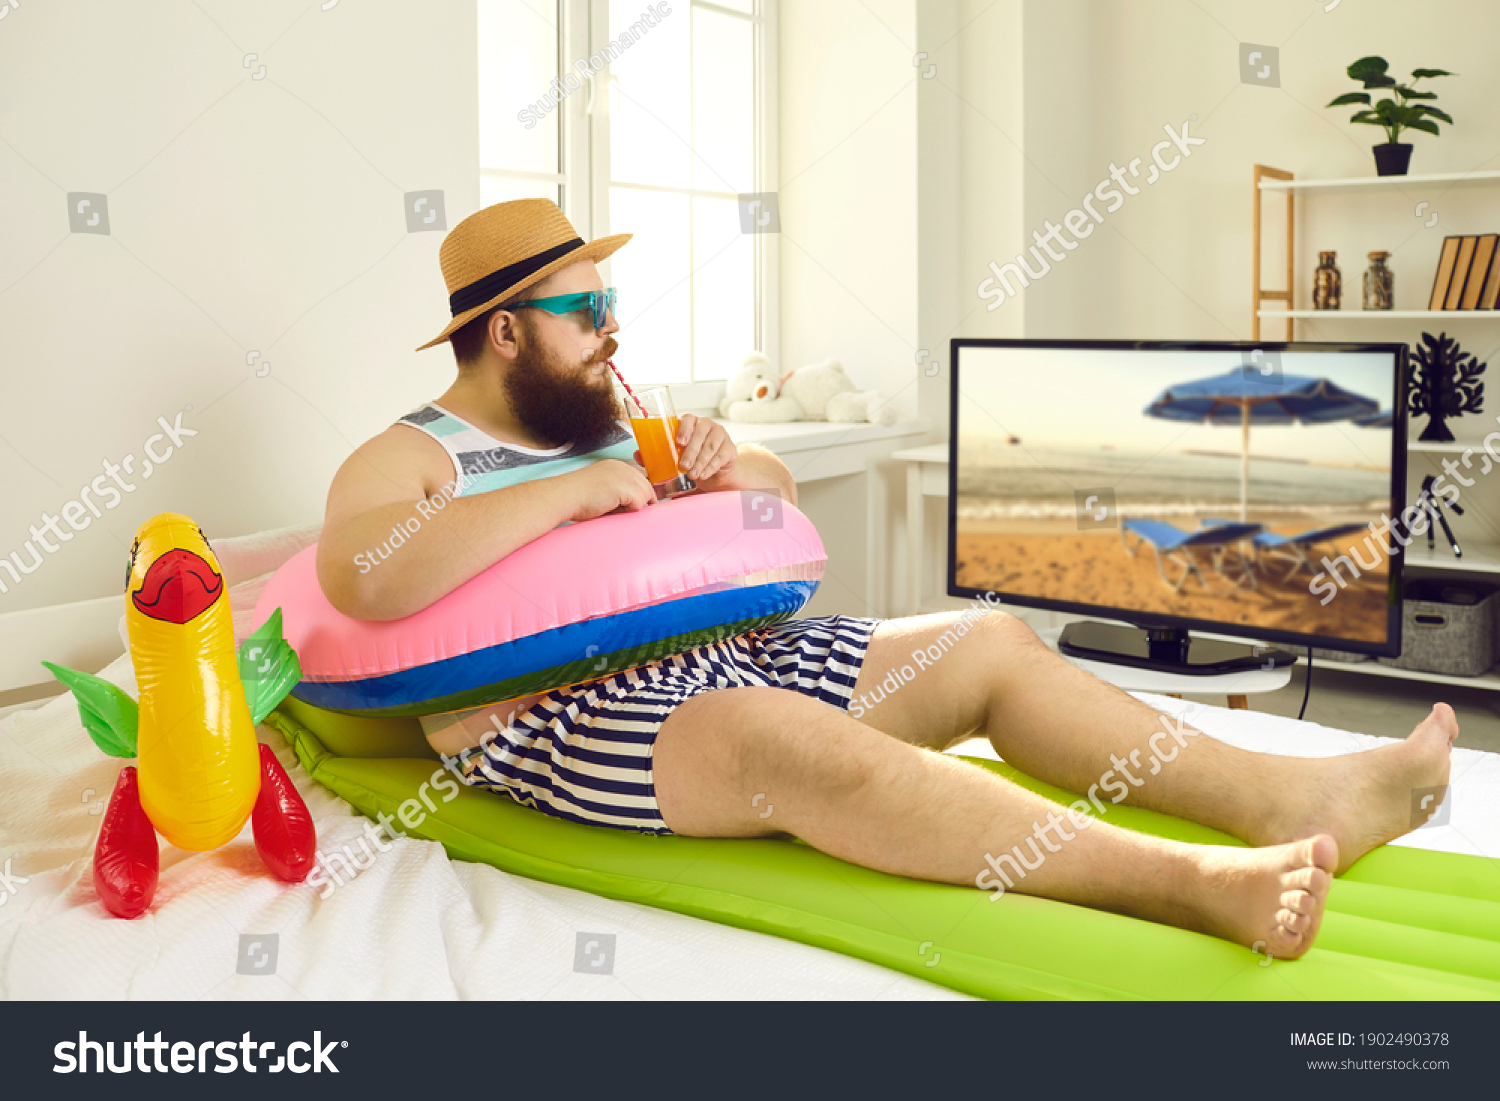 Funny young man with sunglasses and inflatable beach toys sipping cocktail and watching travel show on TV. Concept of canceled summer holiday plans, vacation in lockdown at home or Covid-19 quarantine #1902490378